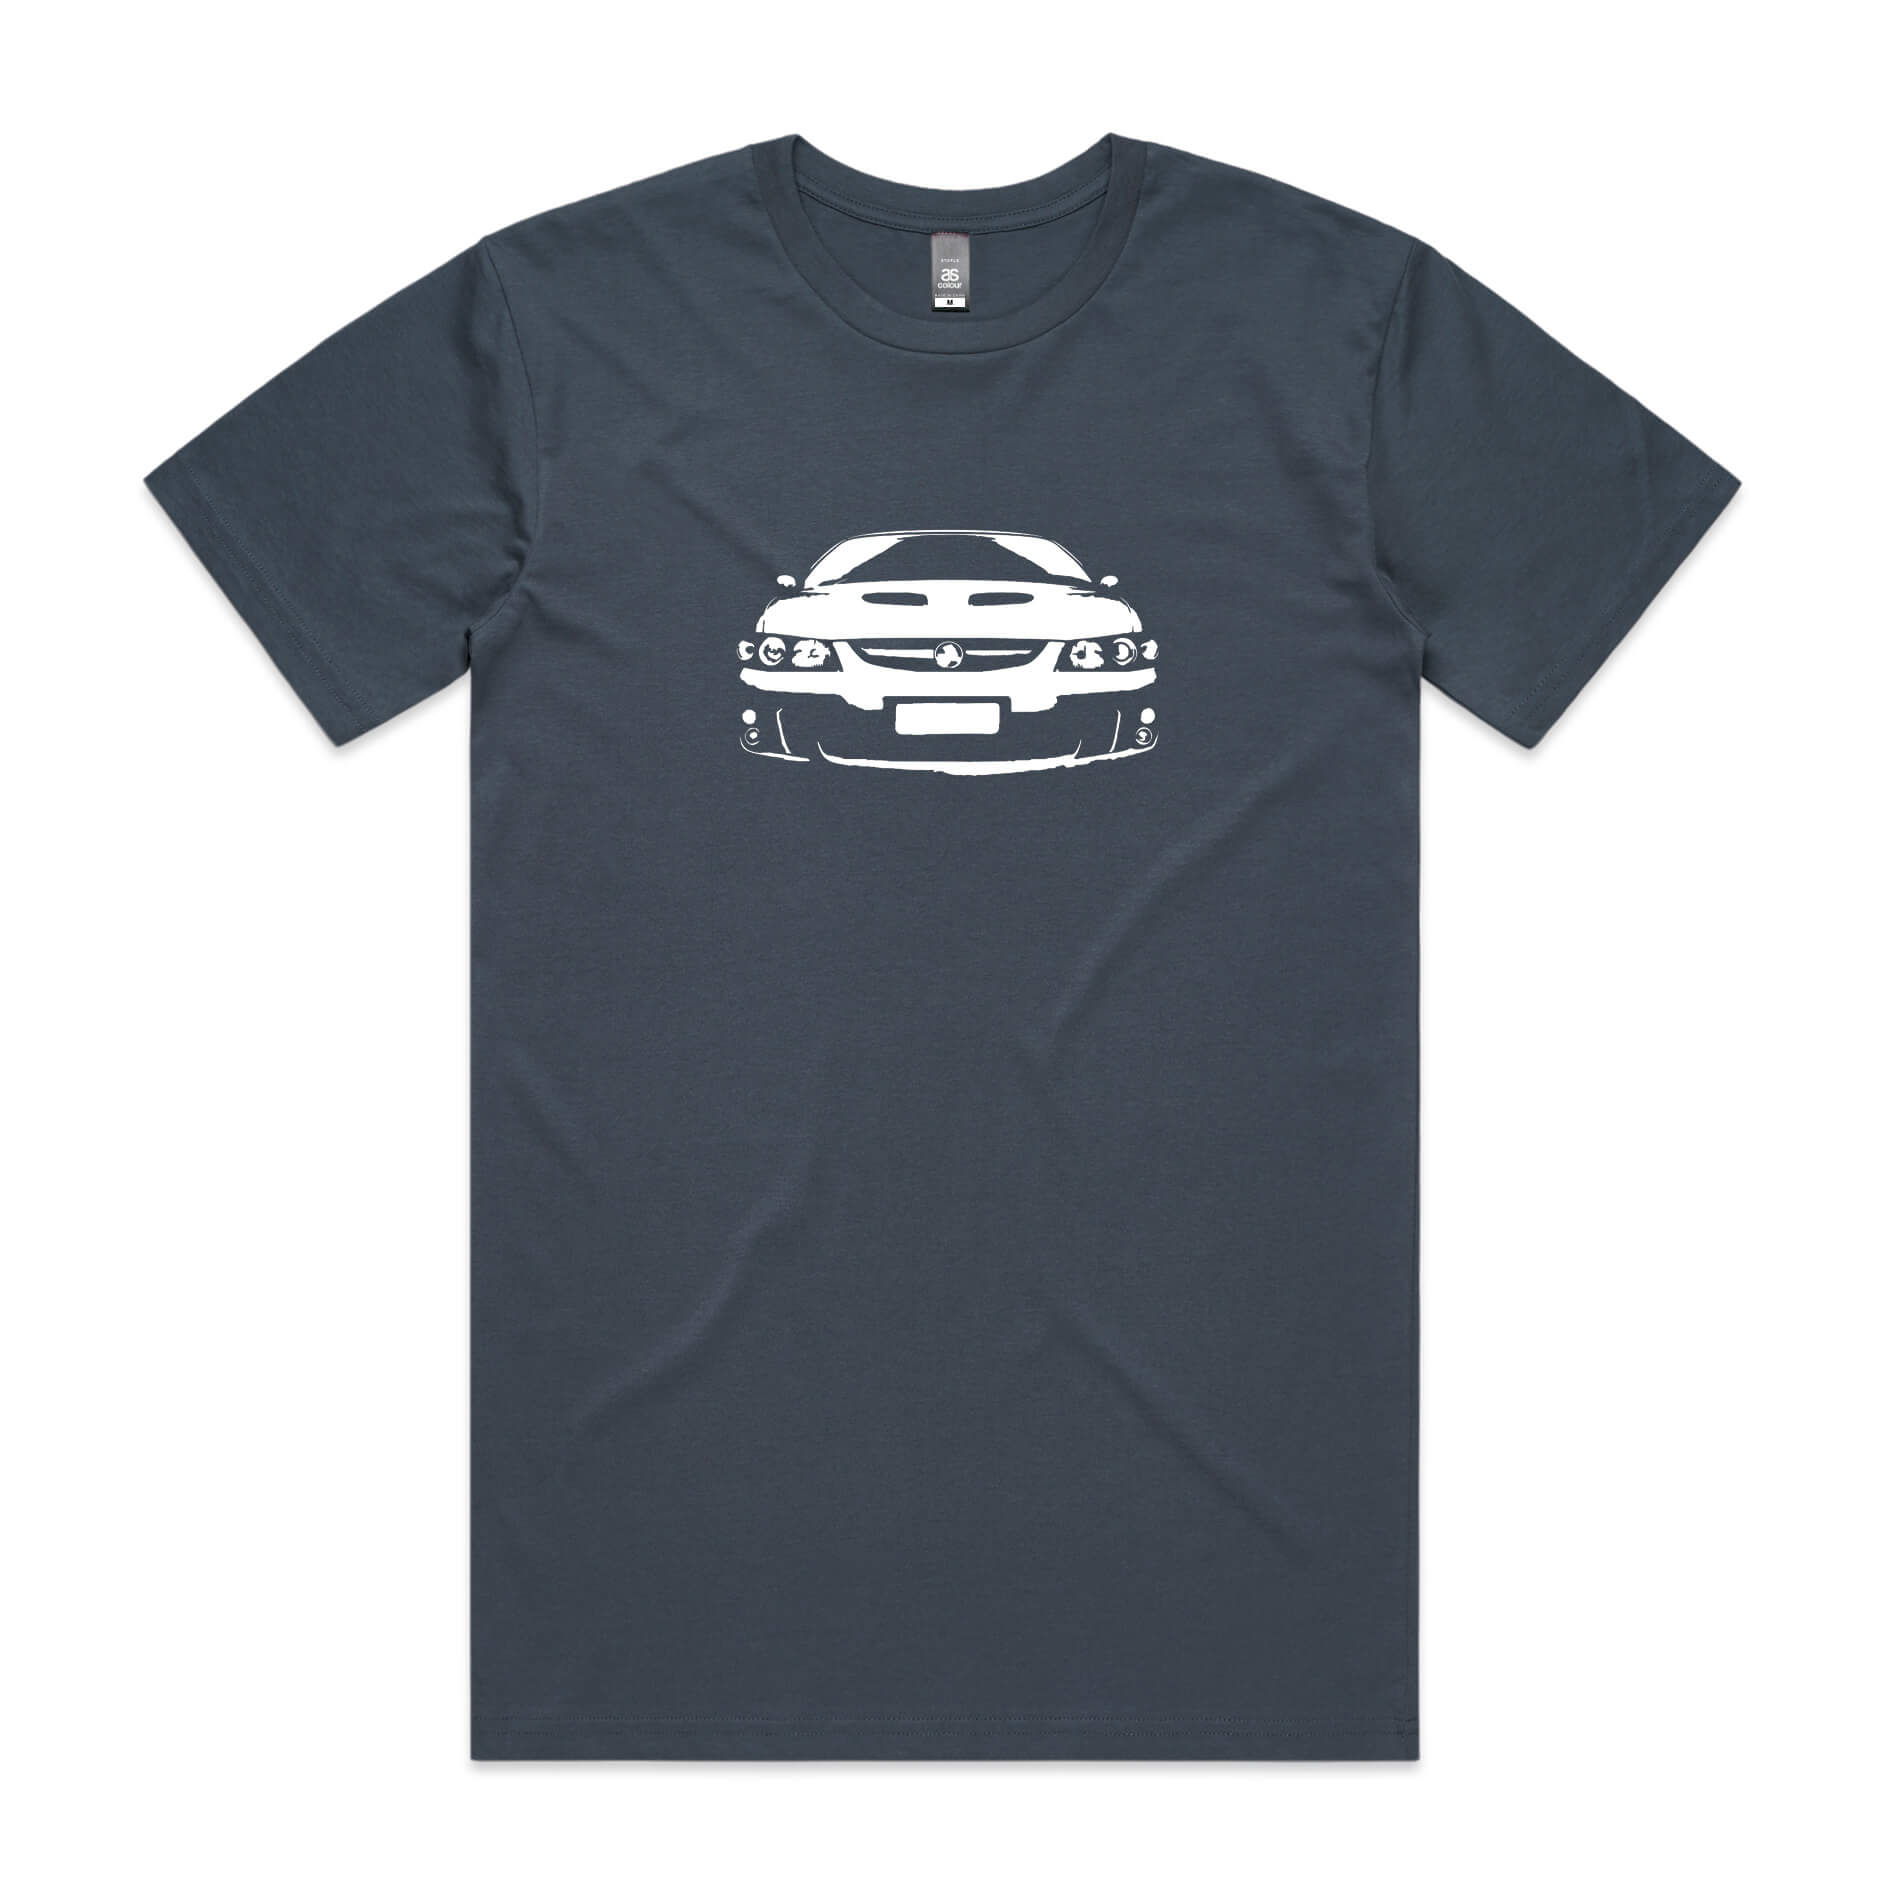 Holden VC8 Monaro t-shirt in Petrol with white Commodore car graphic